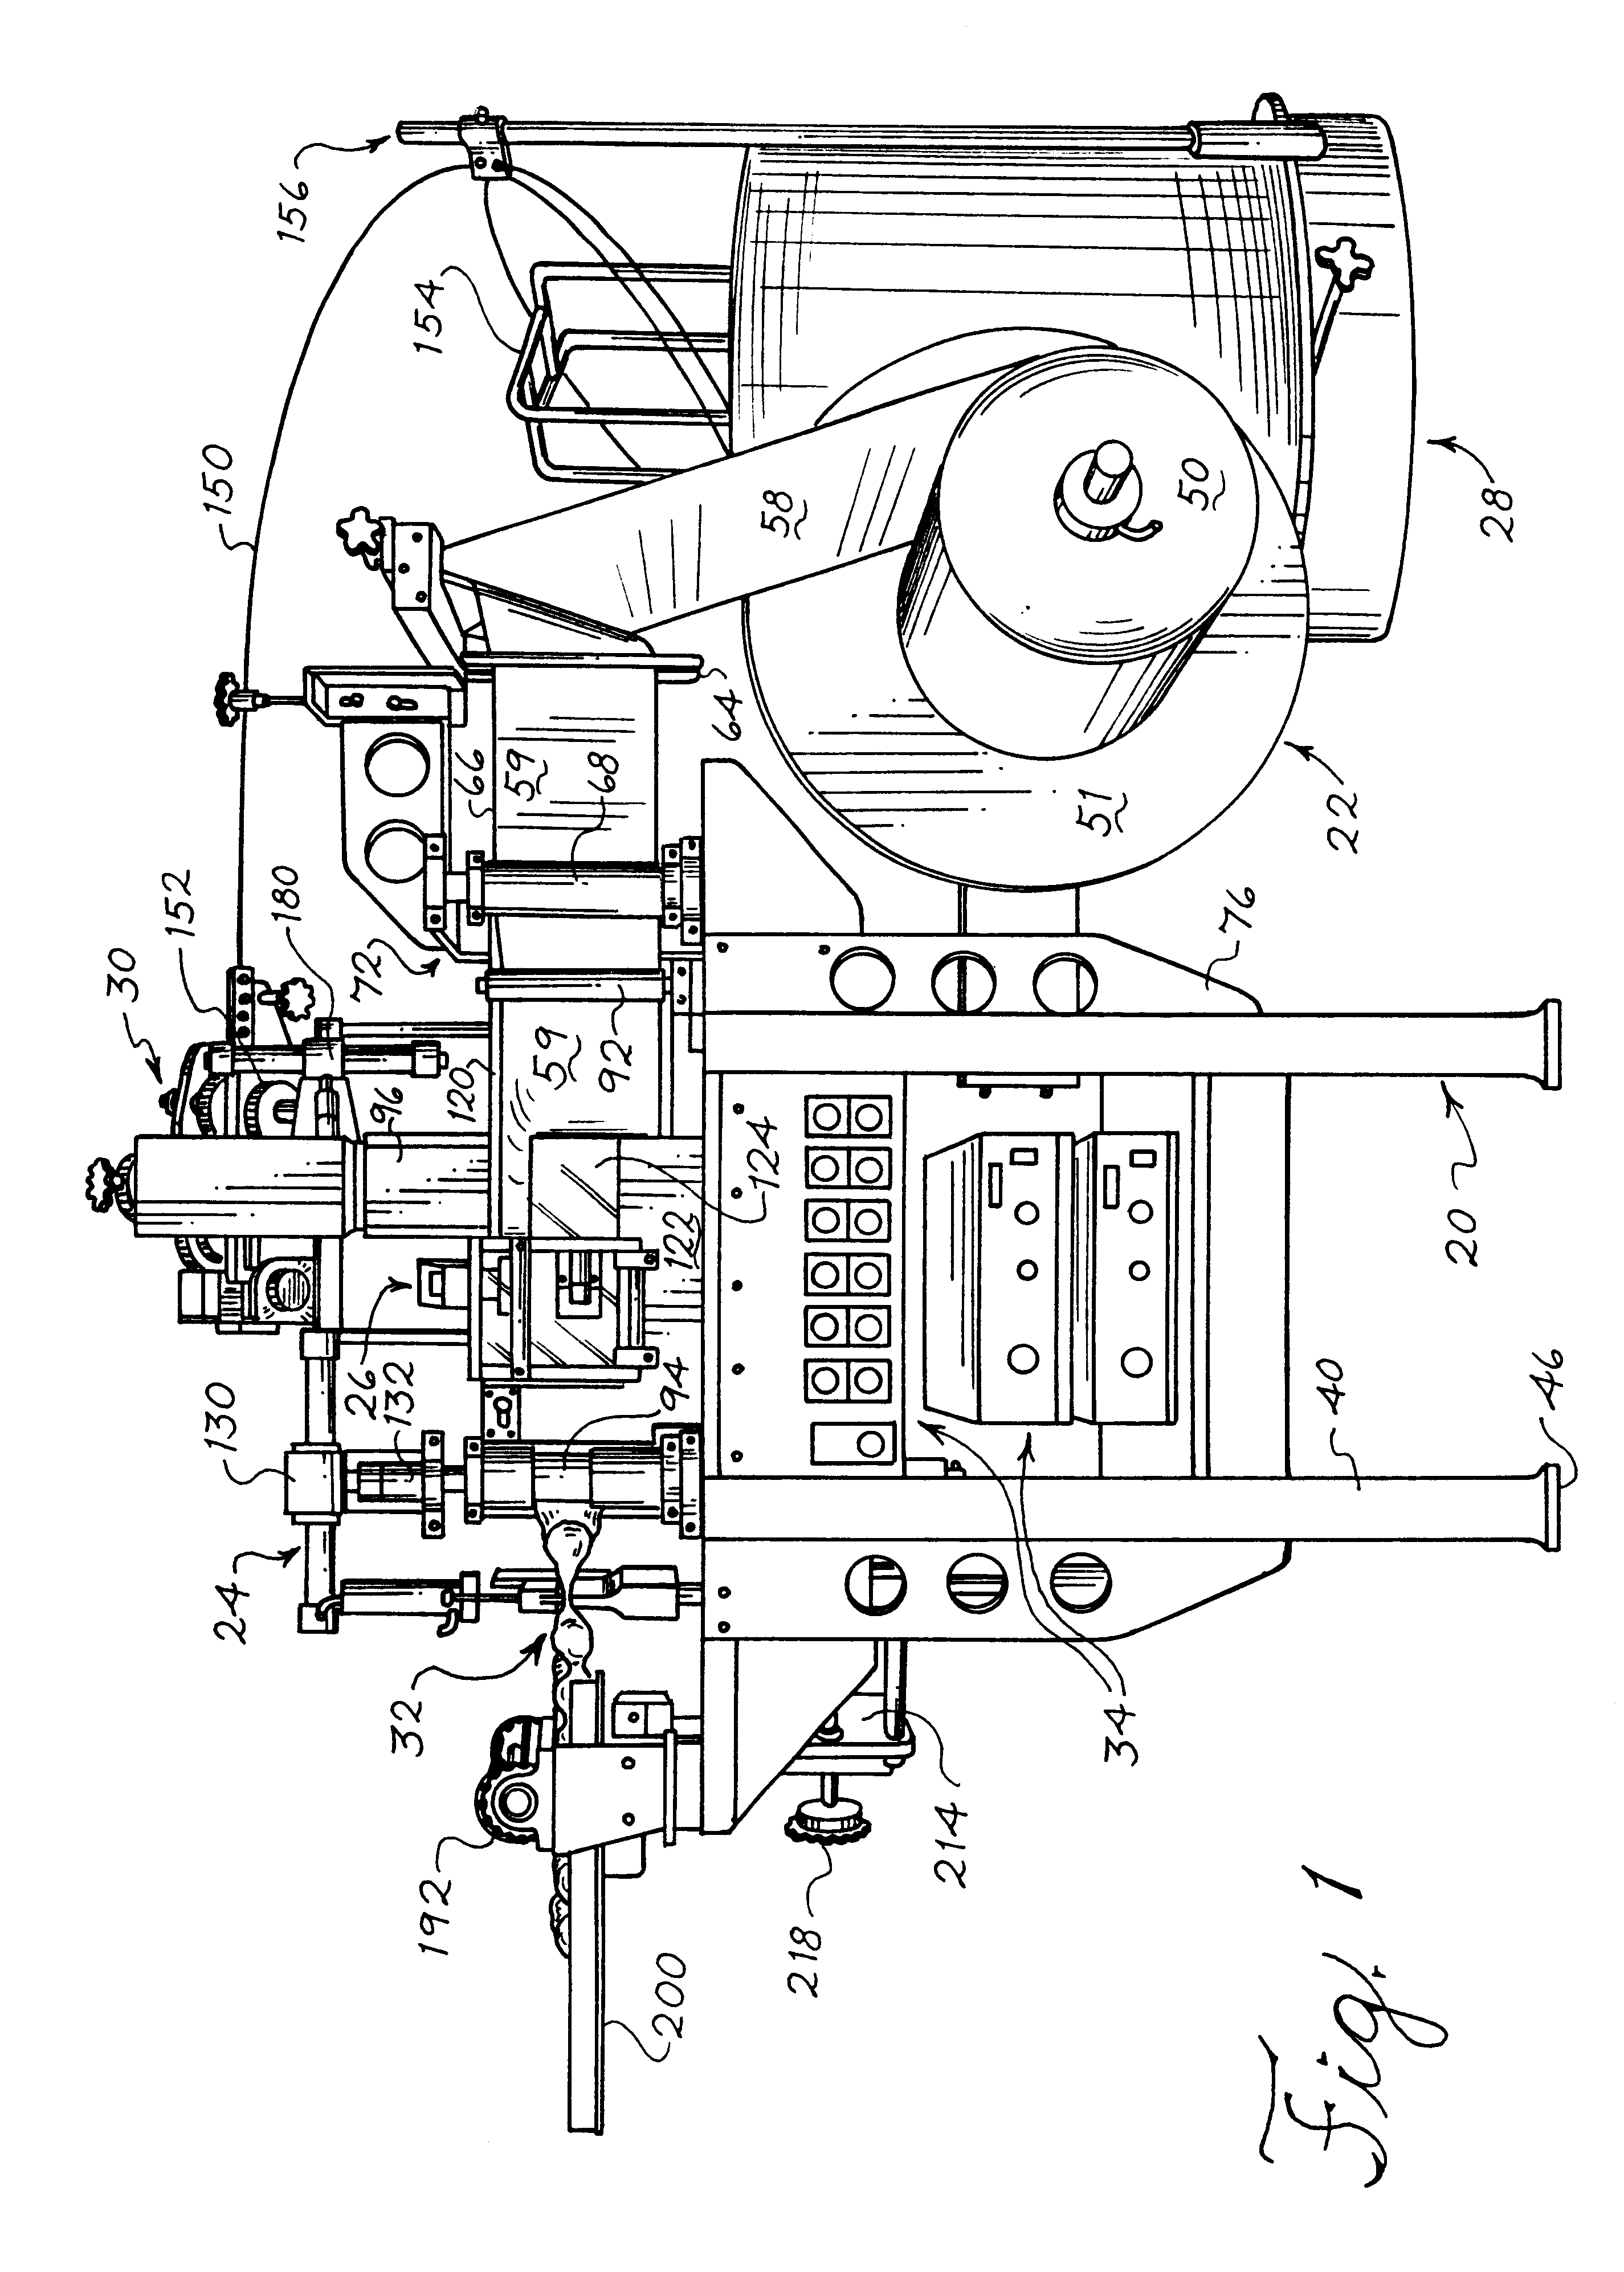 Method and apparatus for the manufacture of pocketed springs